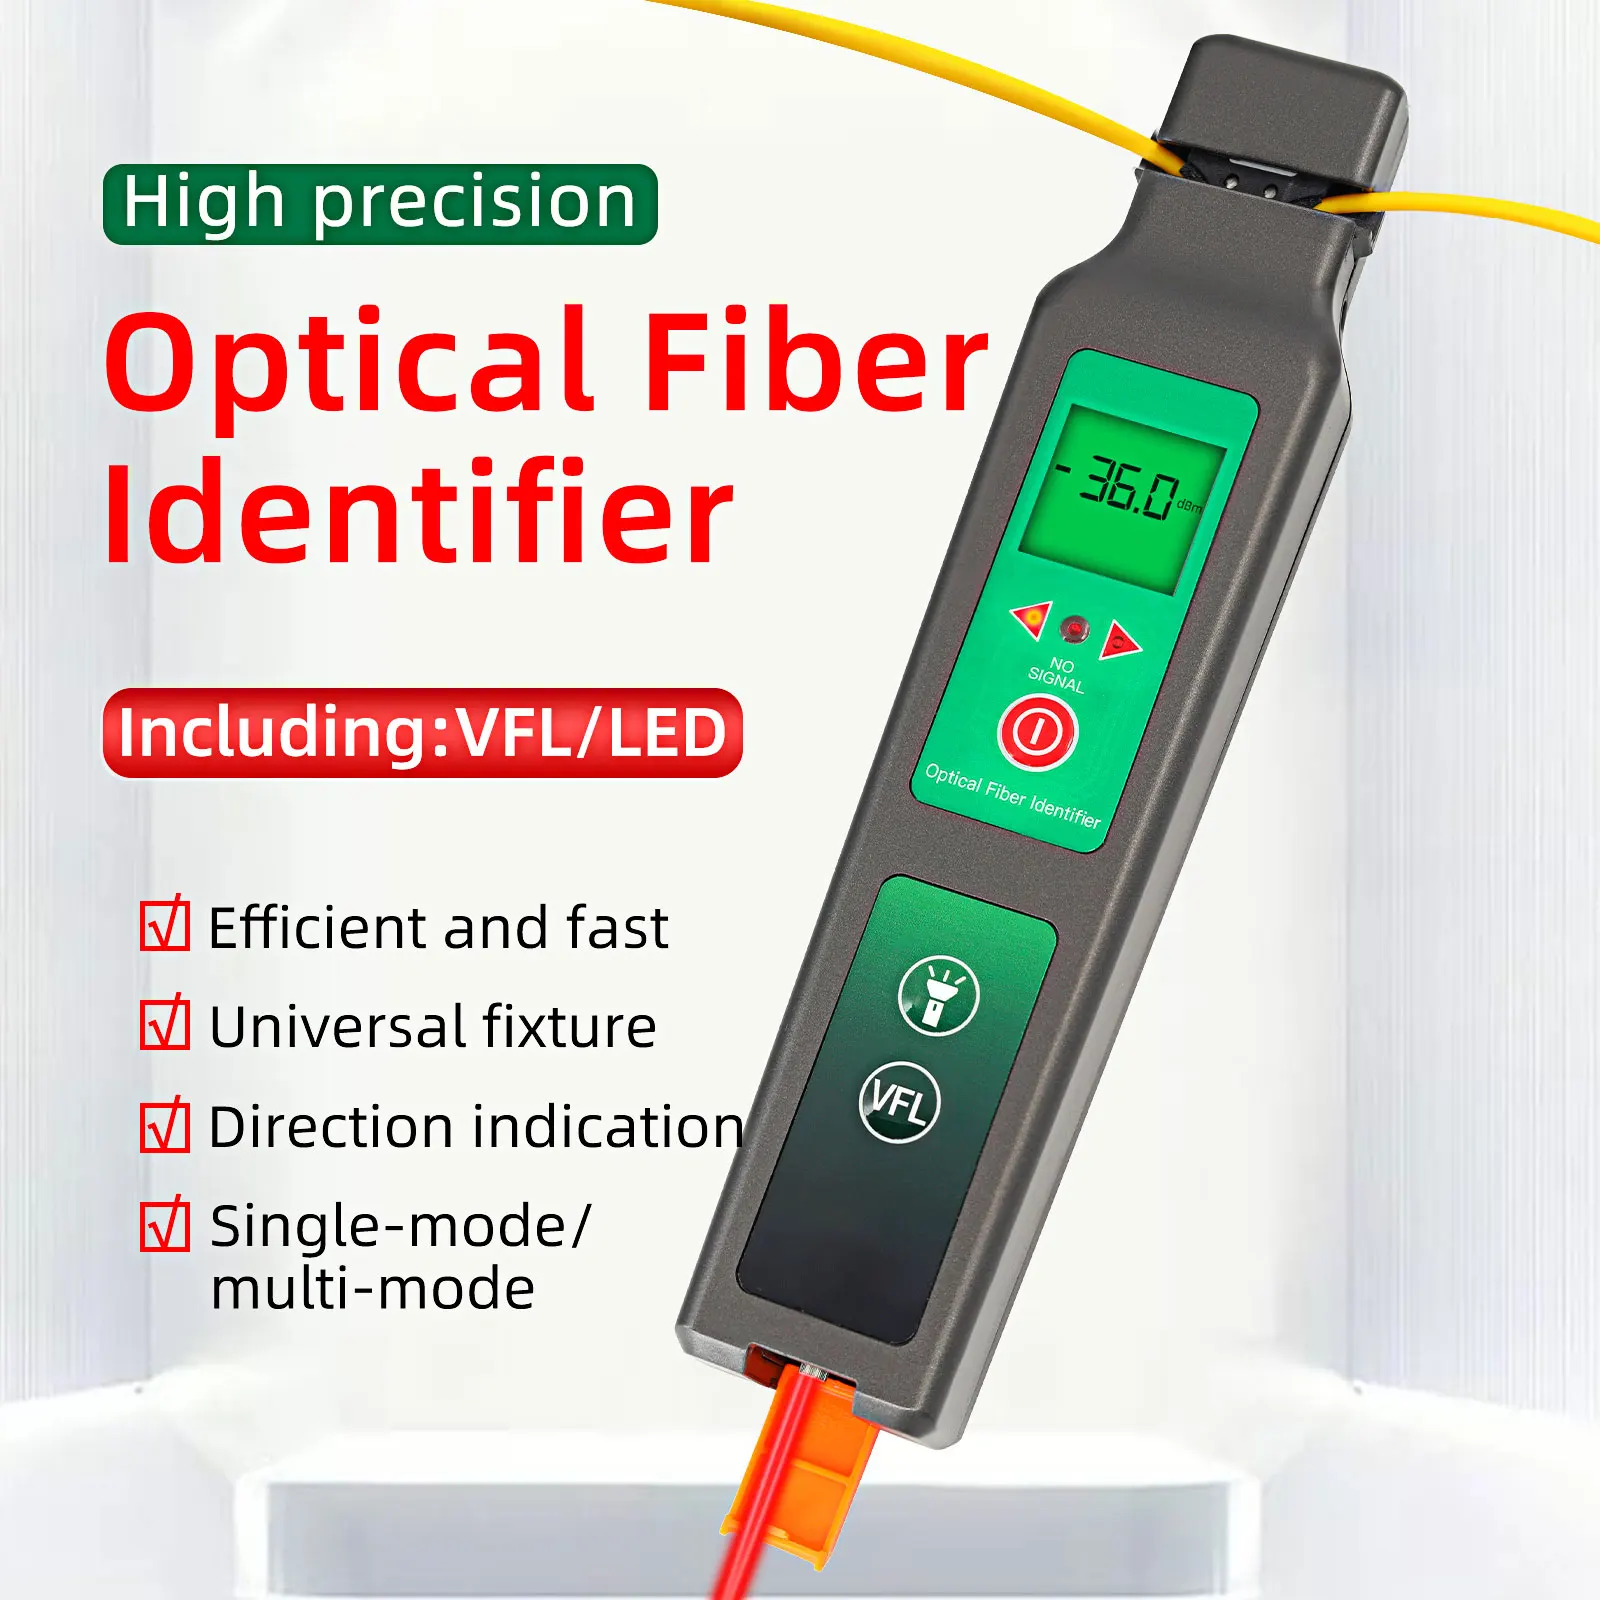 Optic Fiber Identifier + VFL   OFI Live Fiber Identifier Detector 900-1650nm SM and MM with Visual Fault Locator new high definition endoscope with screen pipe camera 8mm lens car maintenance detector visual waterproof industrial endoscope